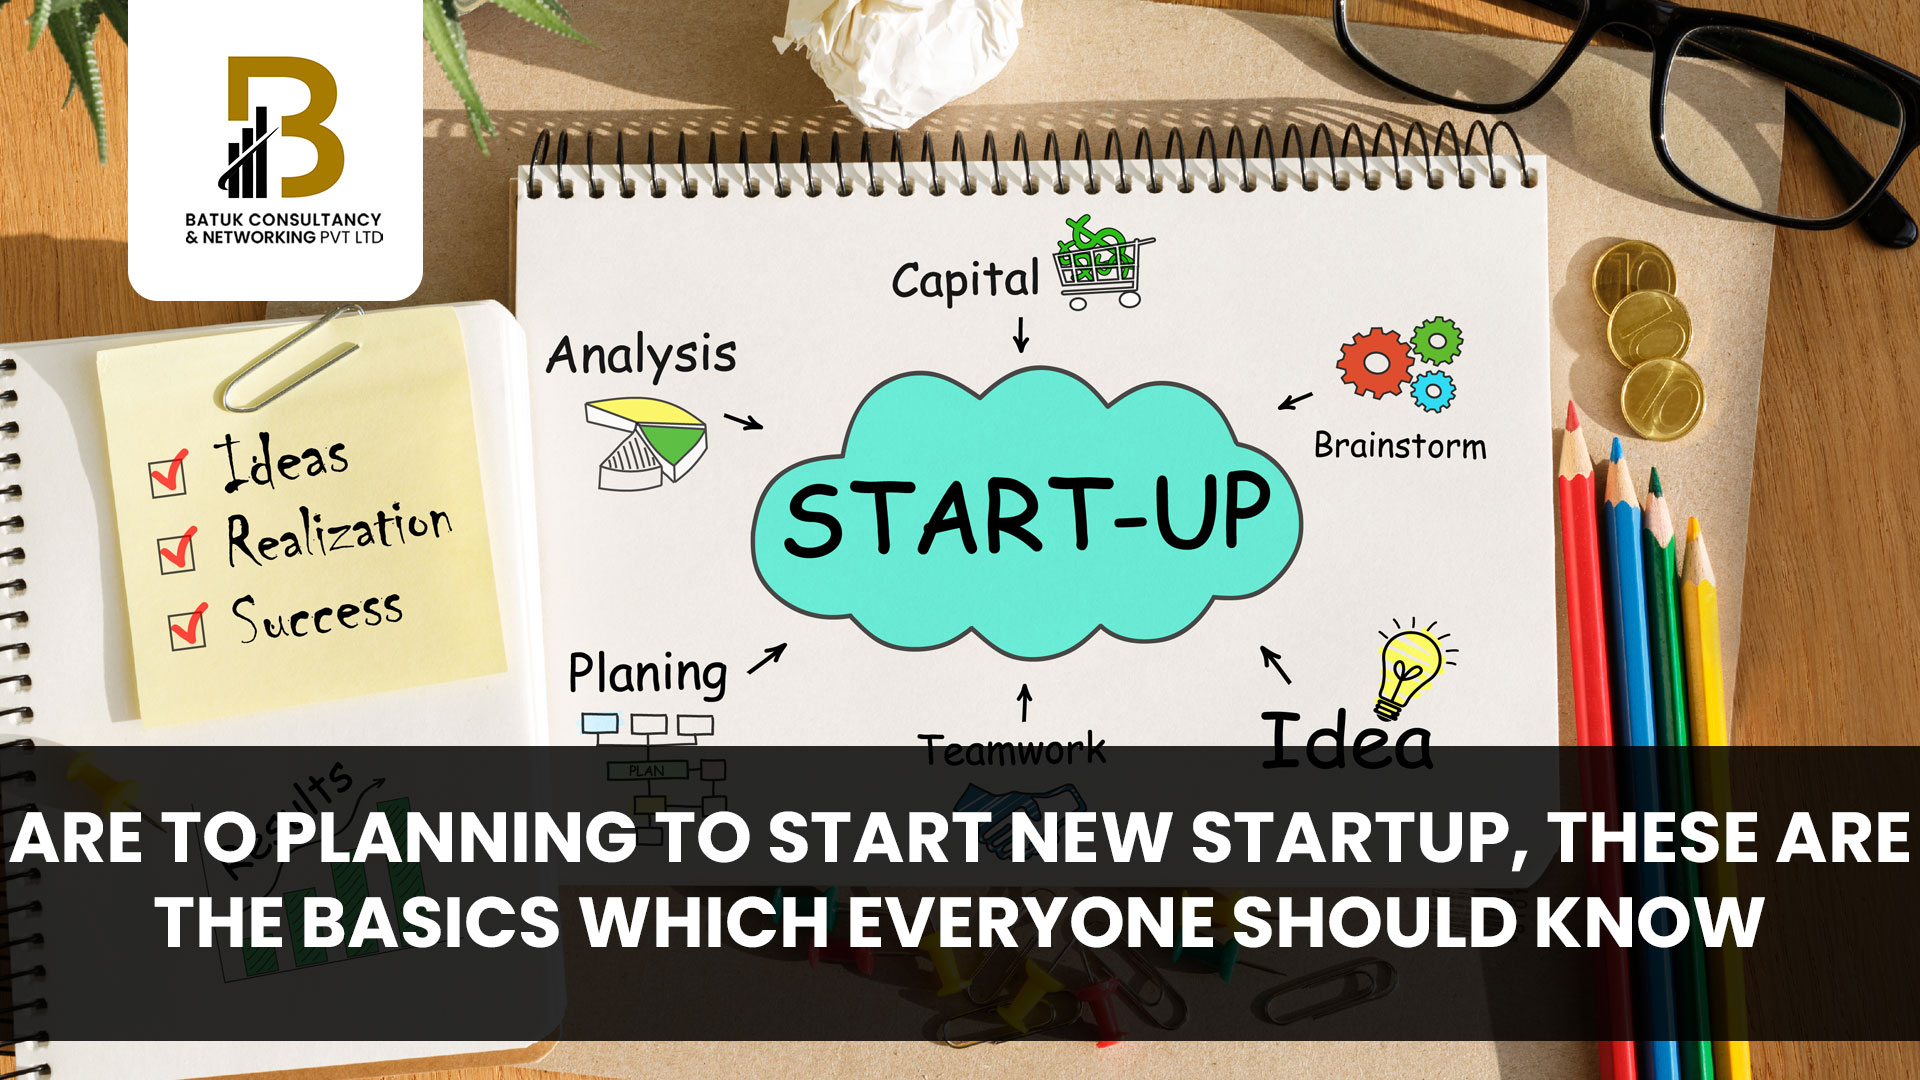 Are to Planning to Start new Startup, these are the basics which everyone should know